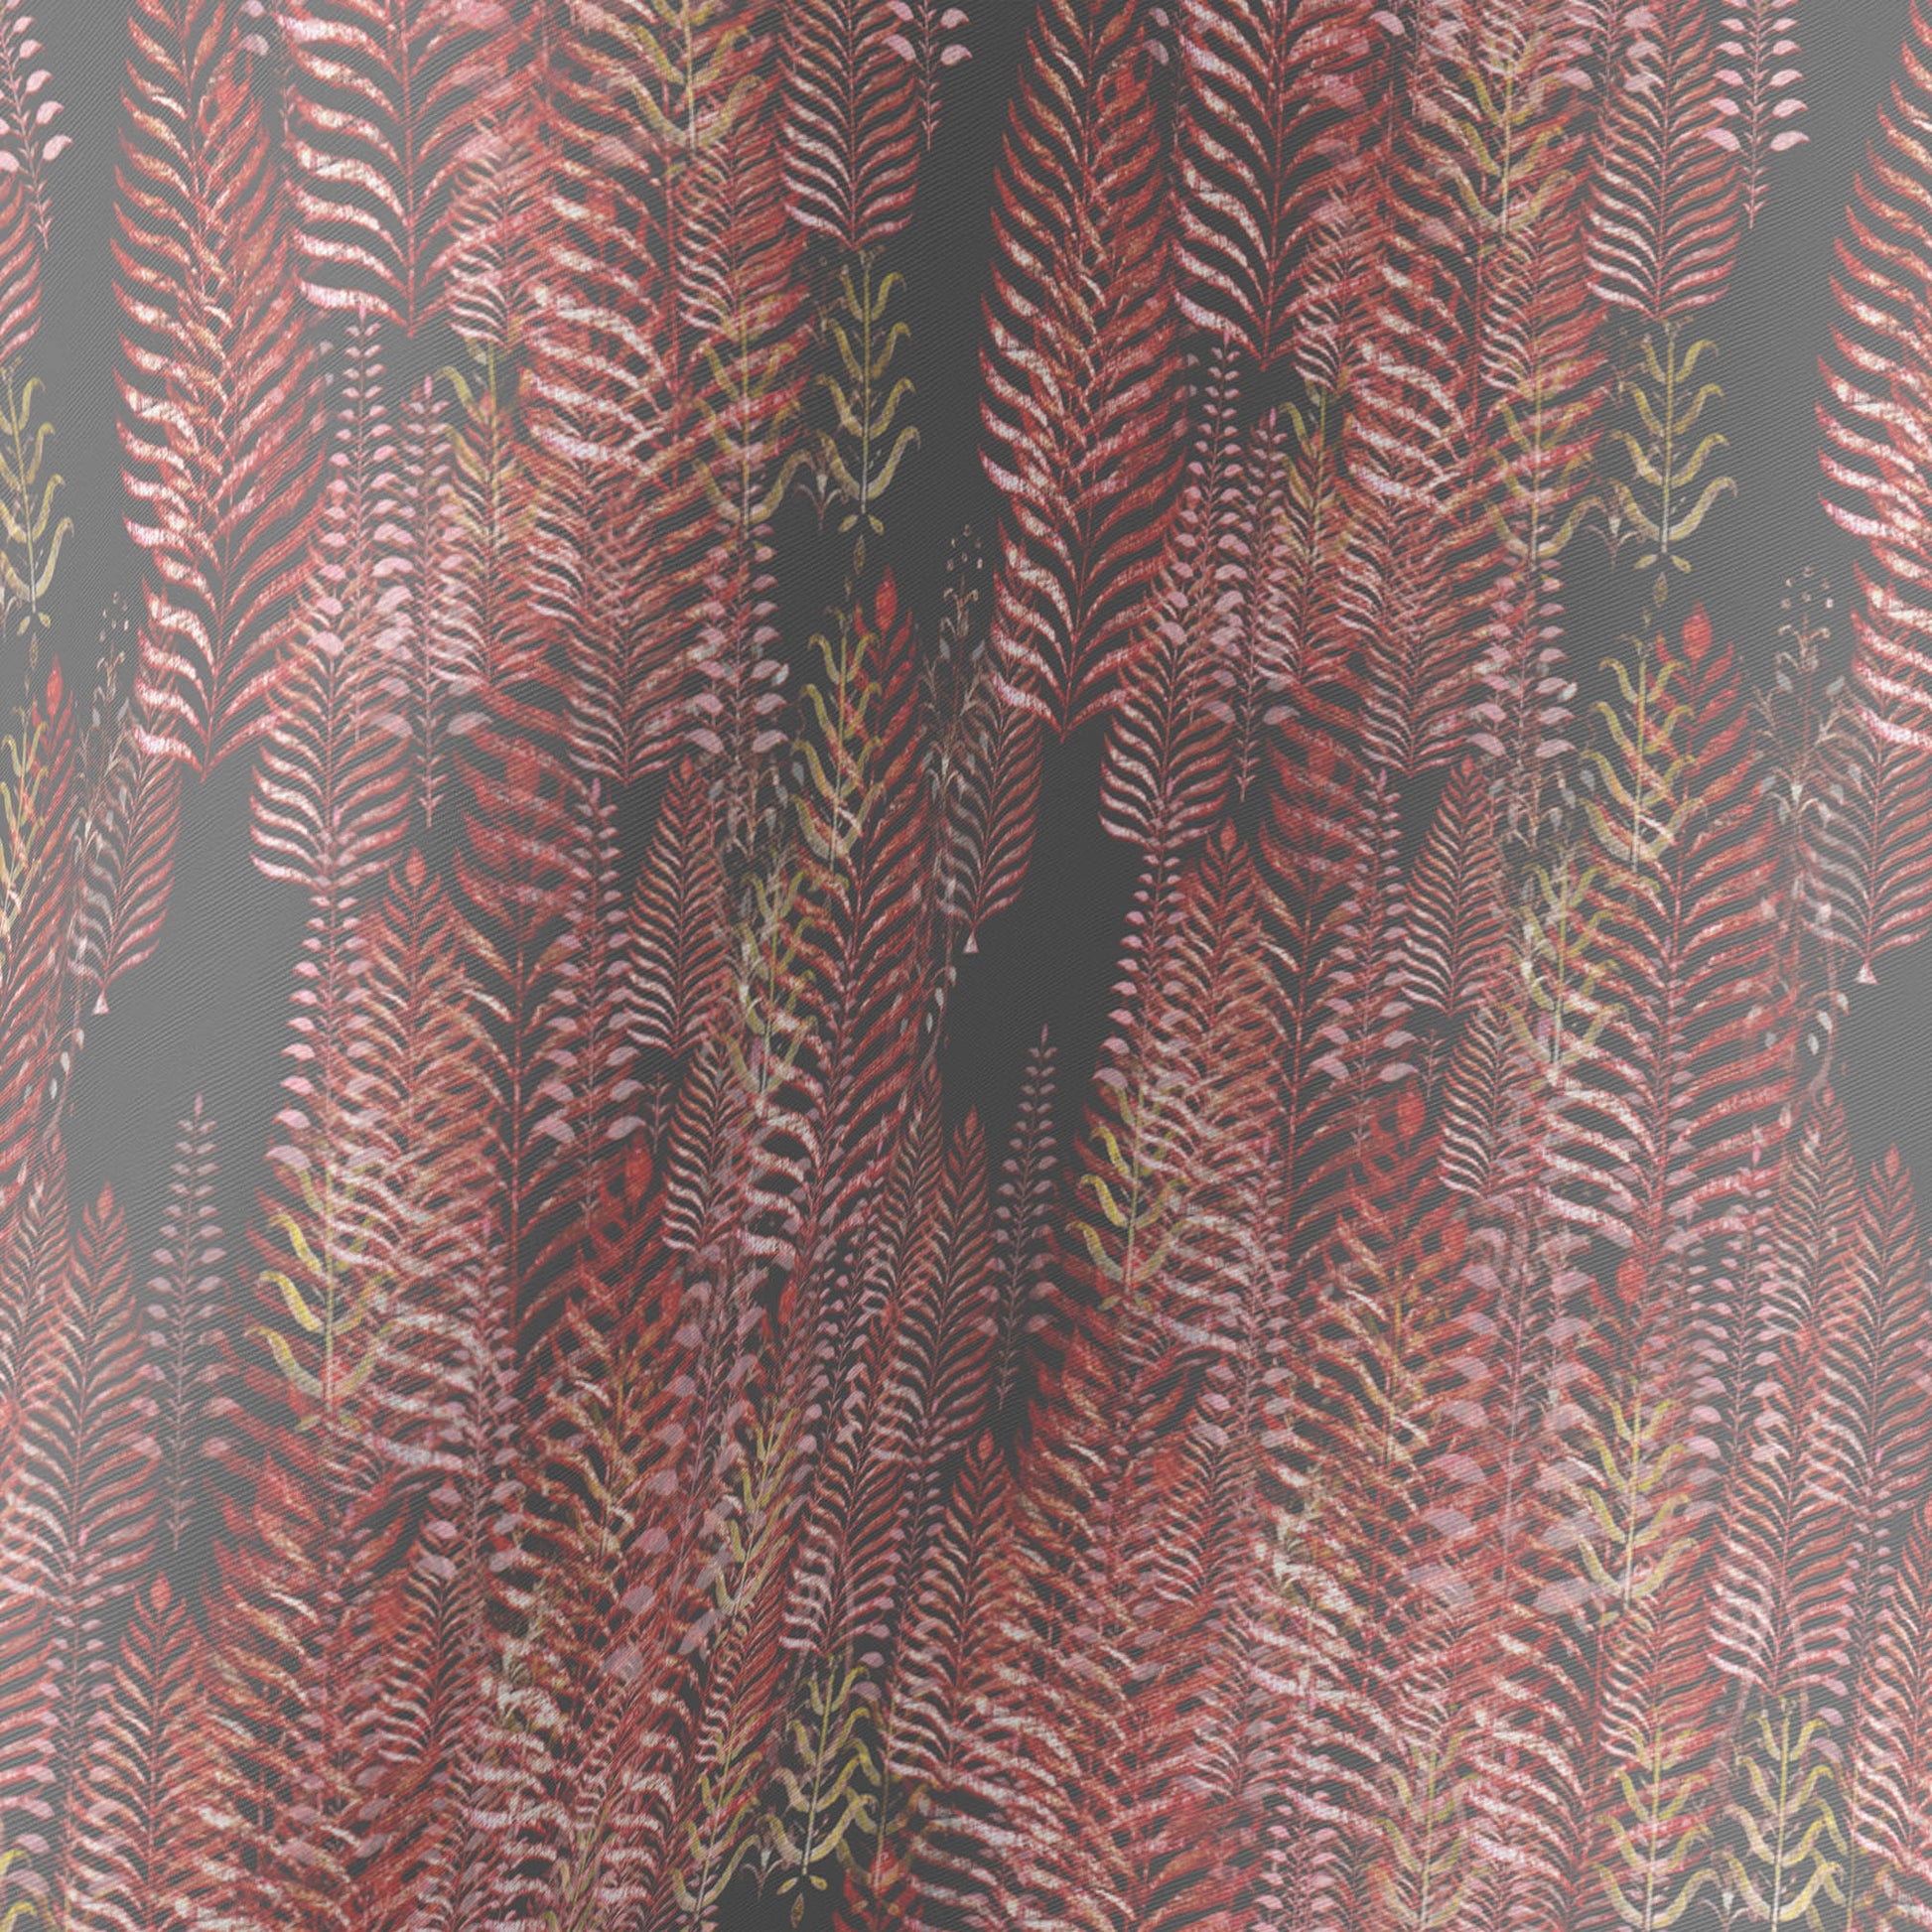 Detail of silk scarf featuring a pink and gray woodblock pattern.